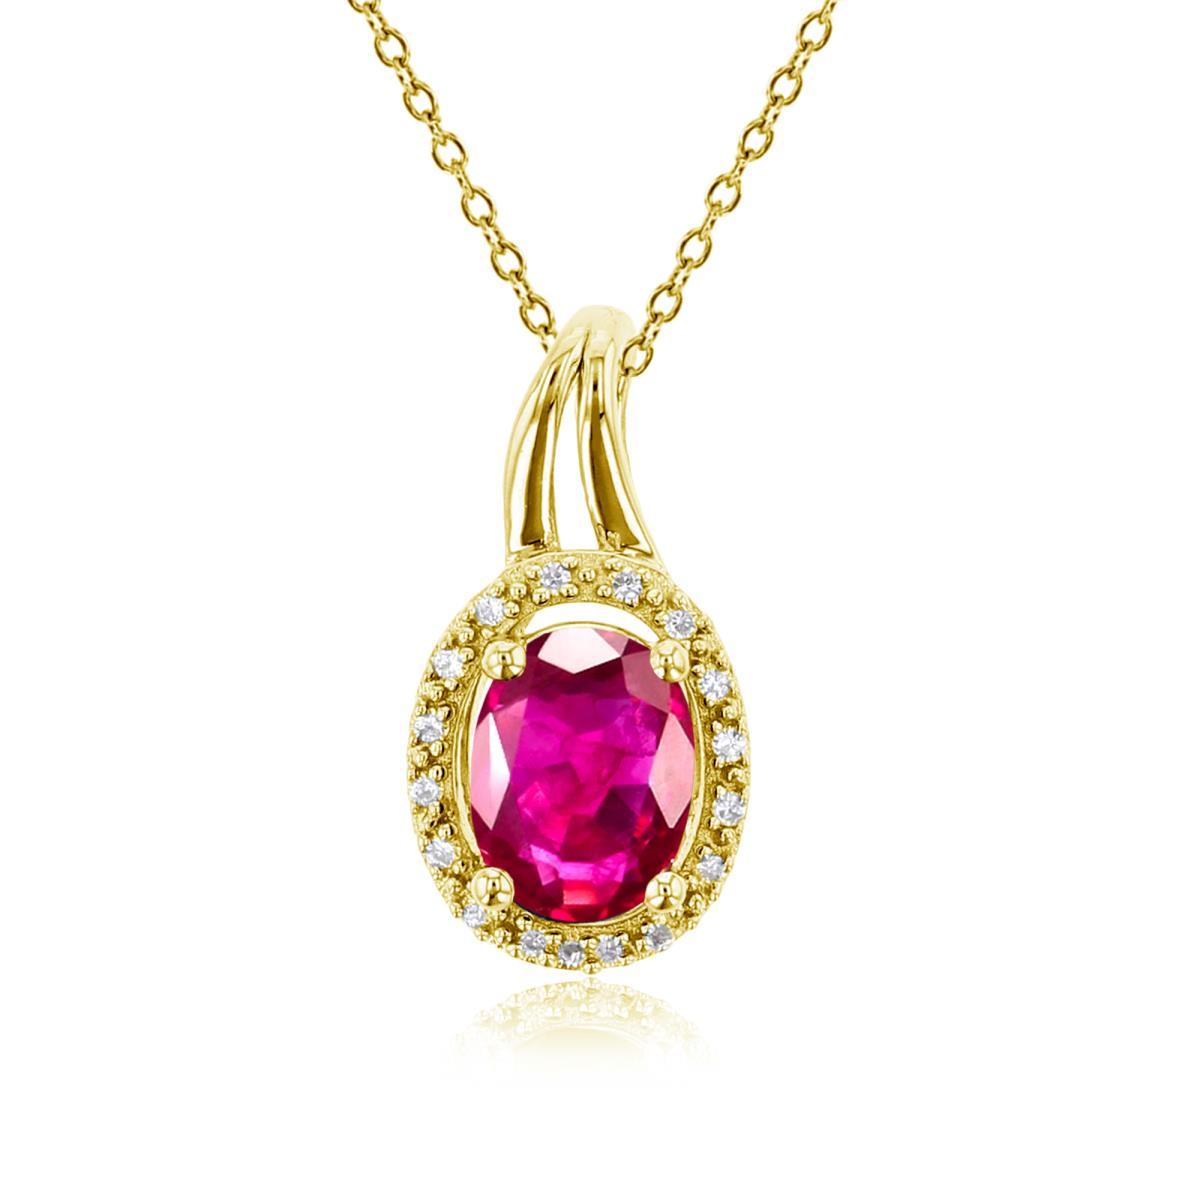 10K Yellow Gold 0.01cttw Diamonds & 7x5mm Ov Glass Filled Ruby Oval Halo 18"Necklace